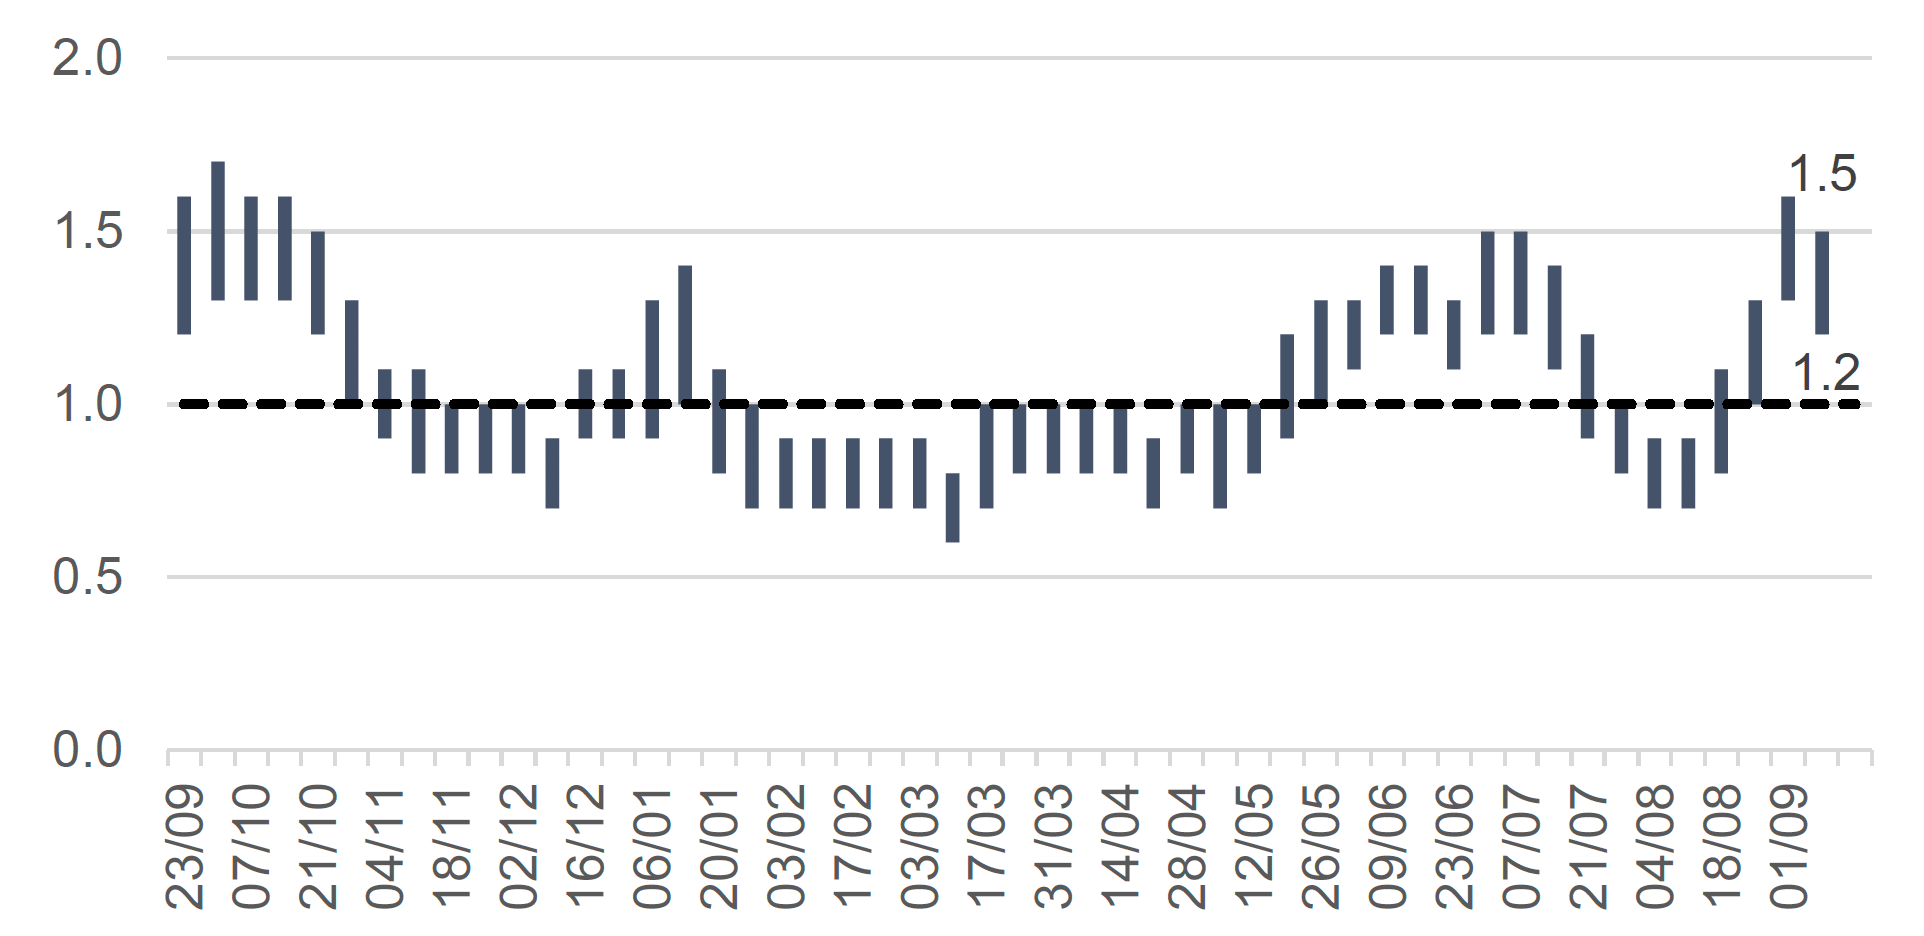 This column chart shows the estimated range of R over time, from late September 2020. The R number has varied over the pandemic with the estimated range moving above 1 in Autumn 2020, January 2021 and again in June 2021. 

The latest R value for Scotland is estimated to be between 1.2 to 1.5,  a decrease in the lower and upper limits from last week.
